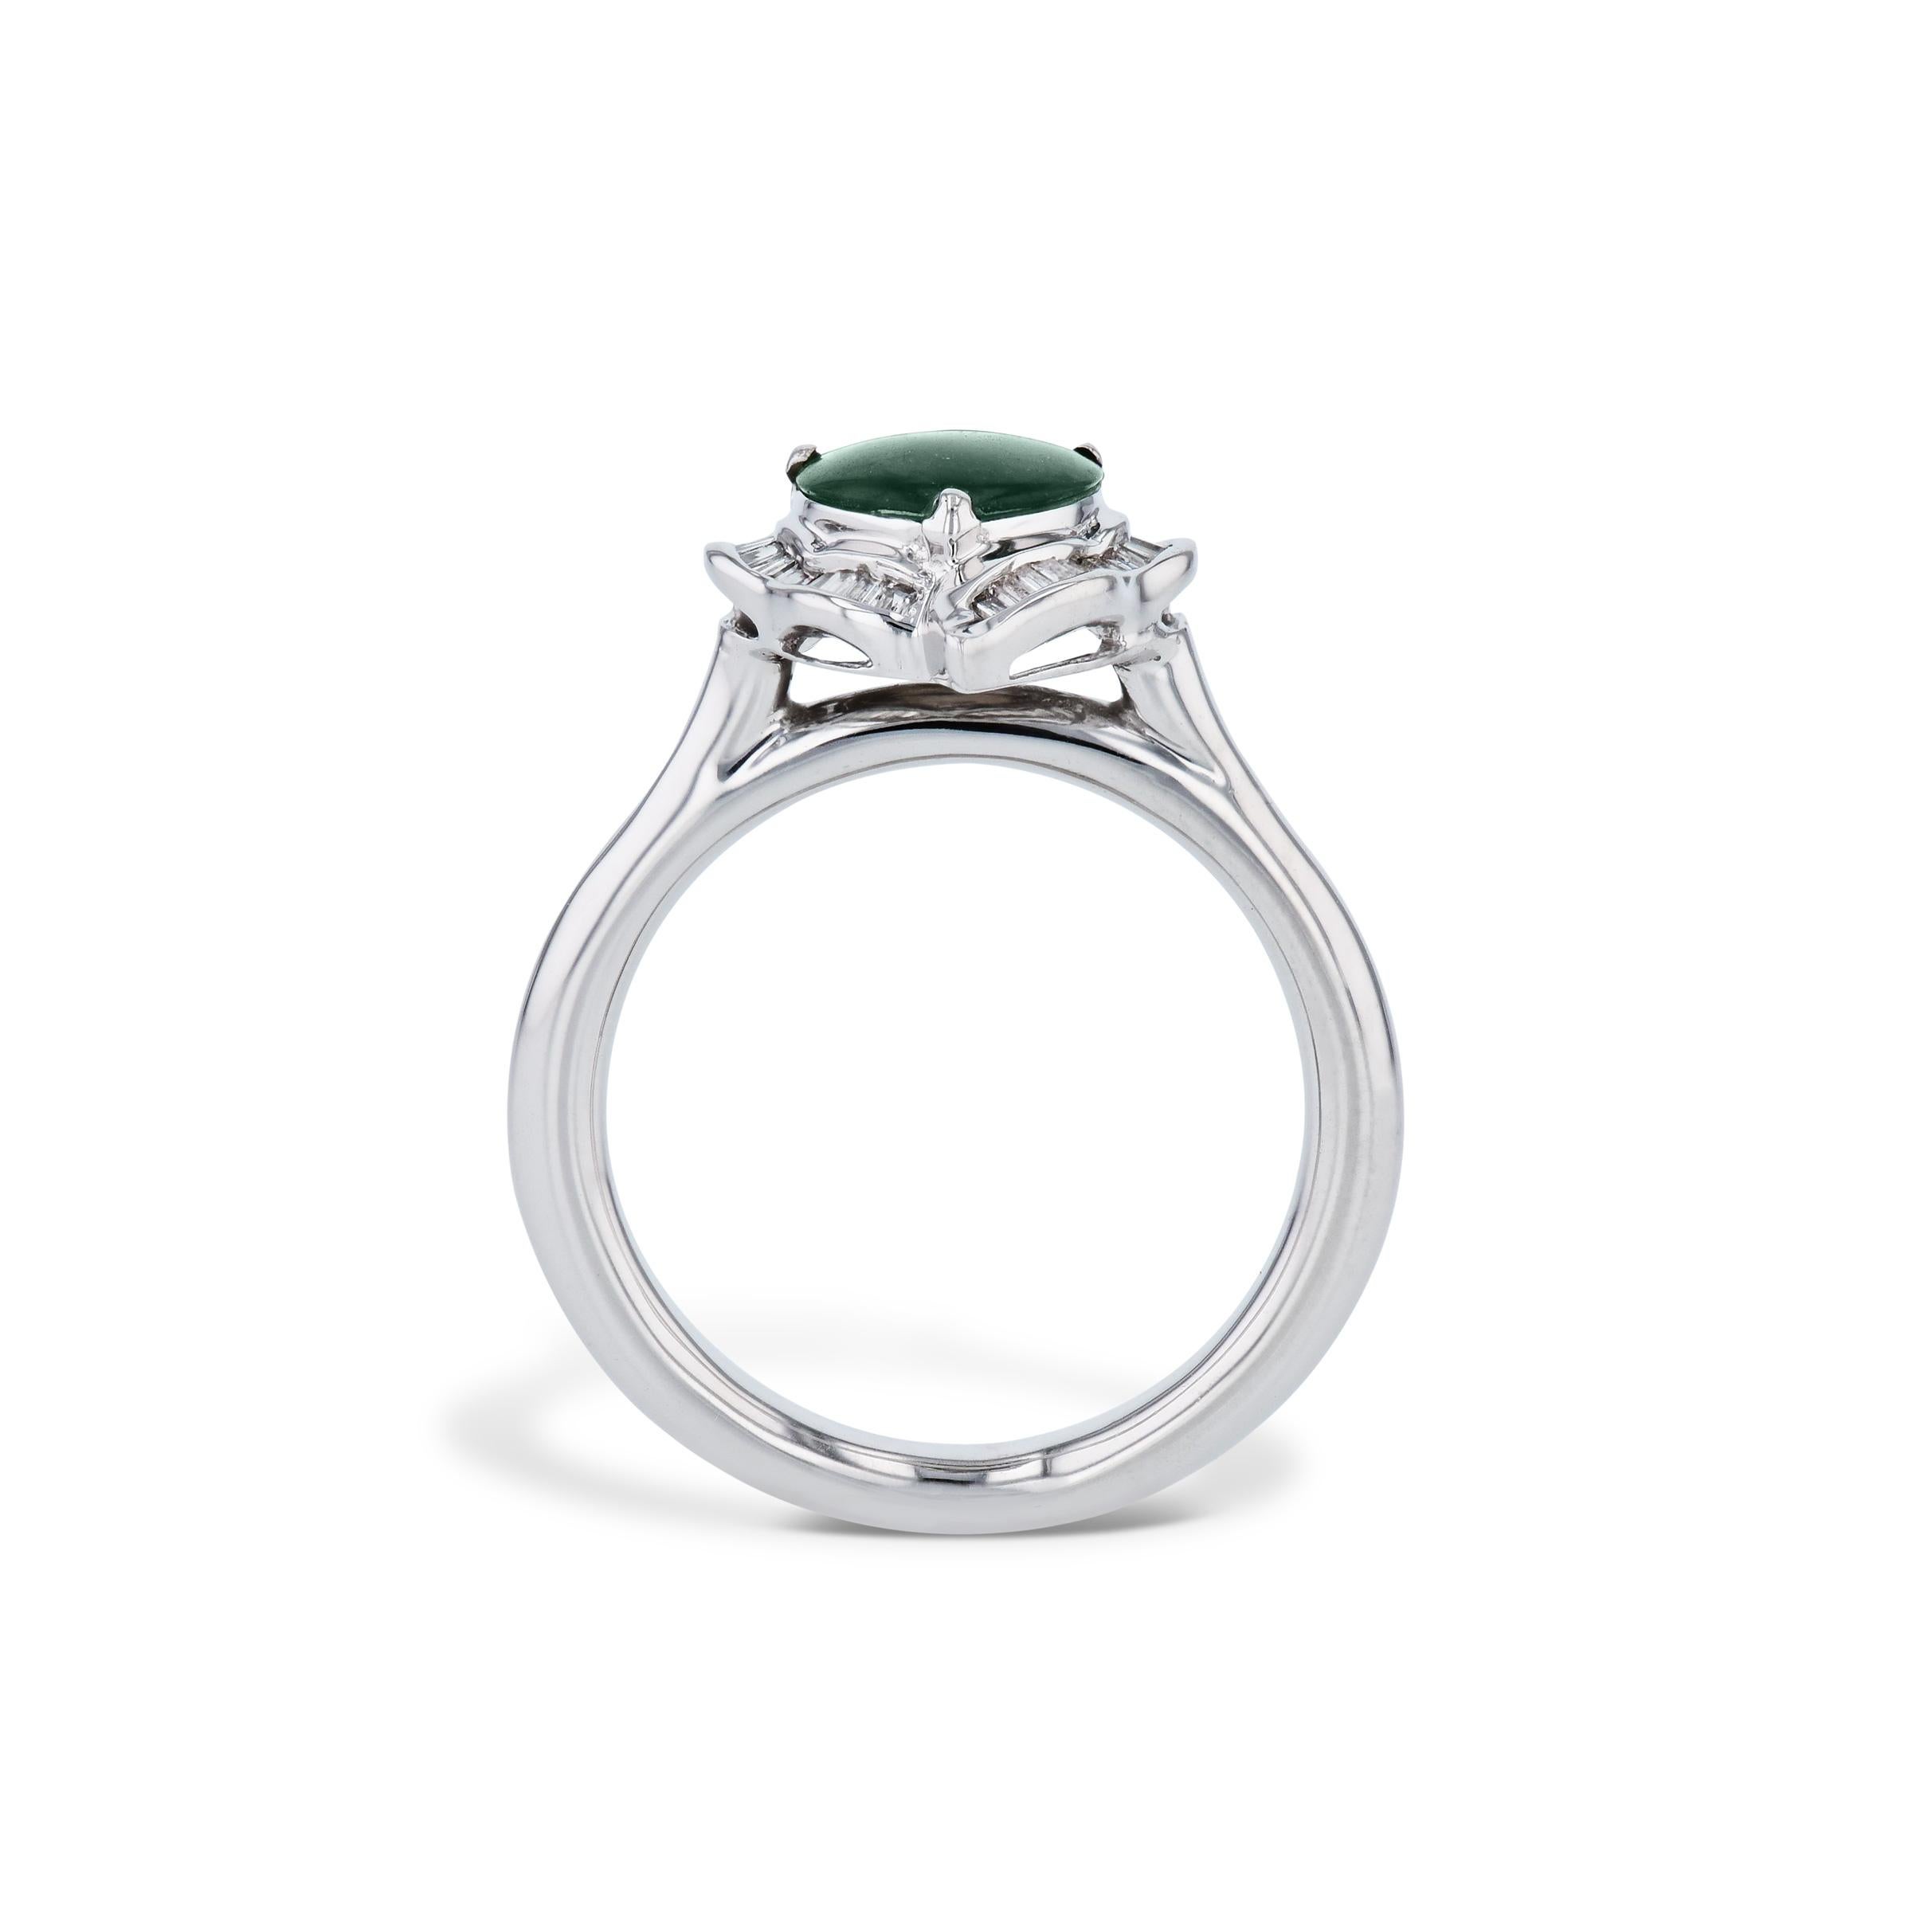 This Heart Cut Jadeite Cabochon Estate Ring is a stunningly beautiful piece that is sure to captivate! Featuring 32 baguette cut diamonds, exquisitely crafted in 14kt. white gold and sized to a 6. Don't miss the opportunity to own such a remarkable